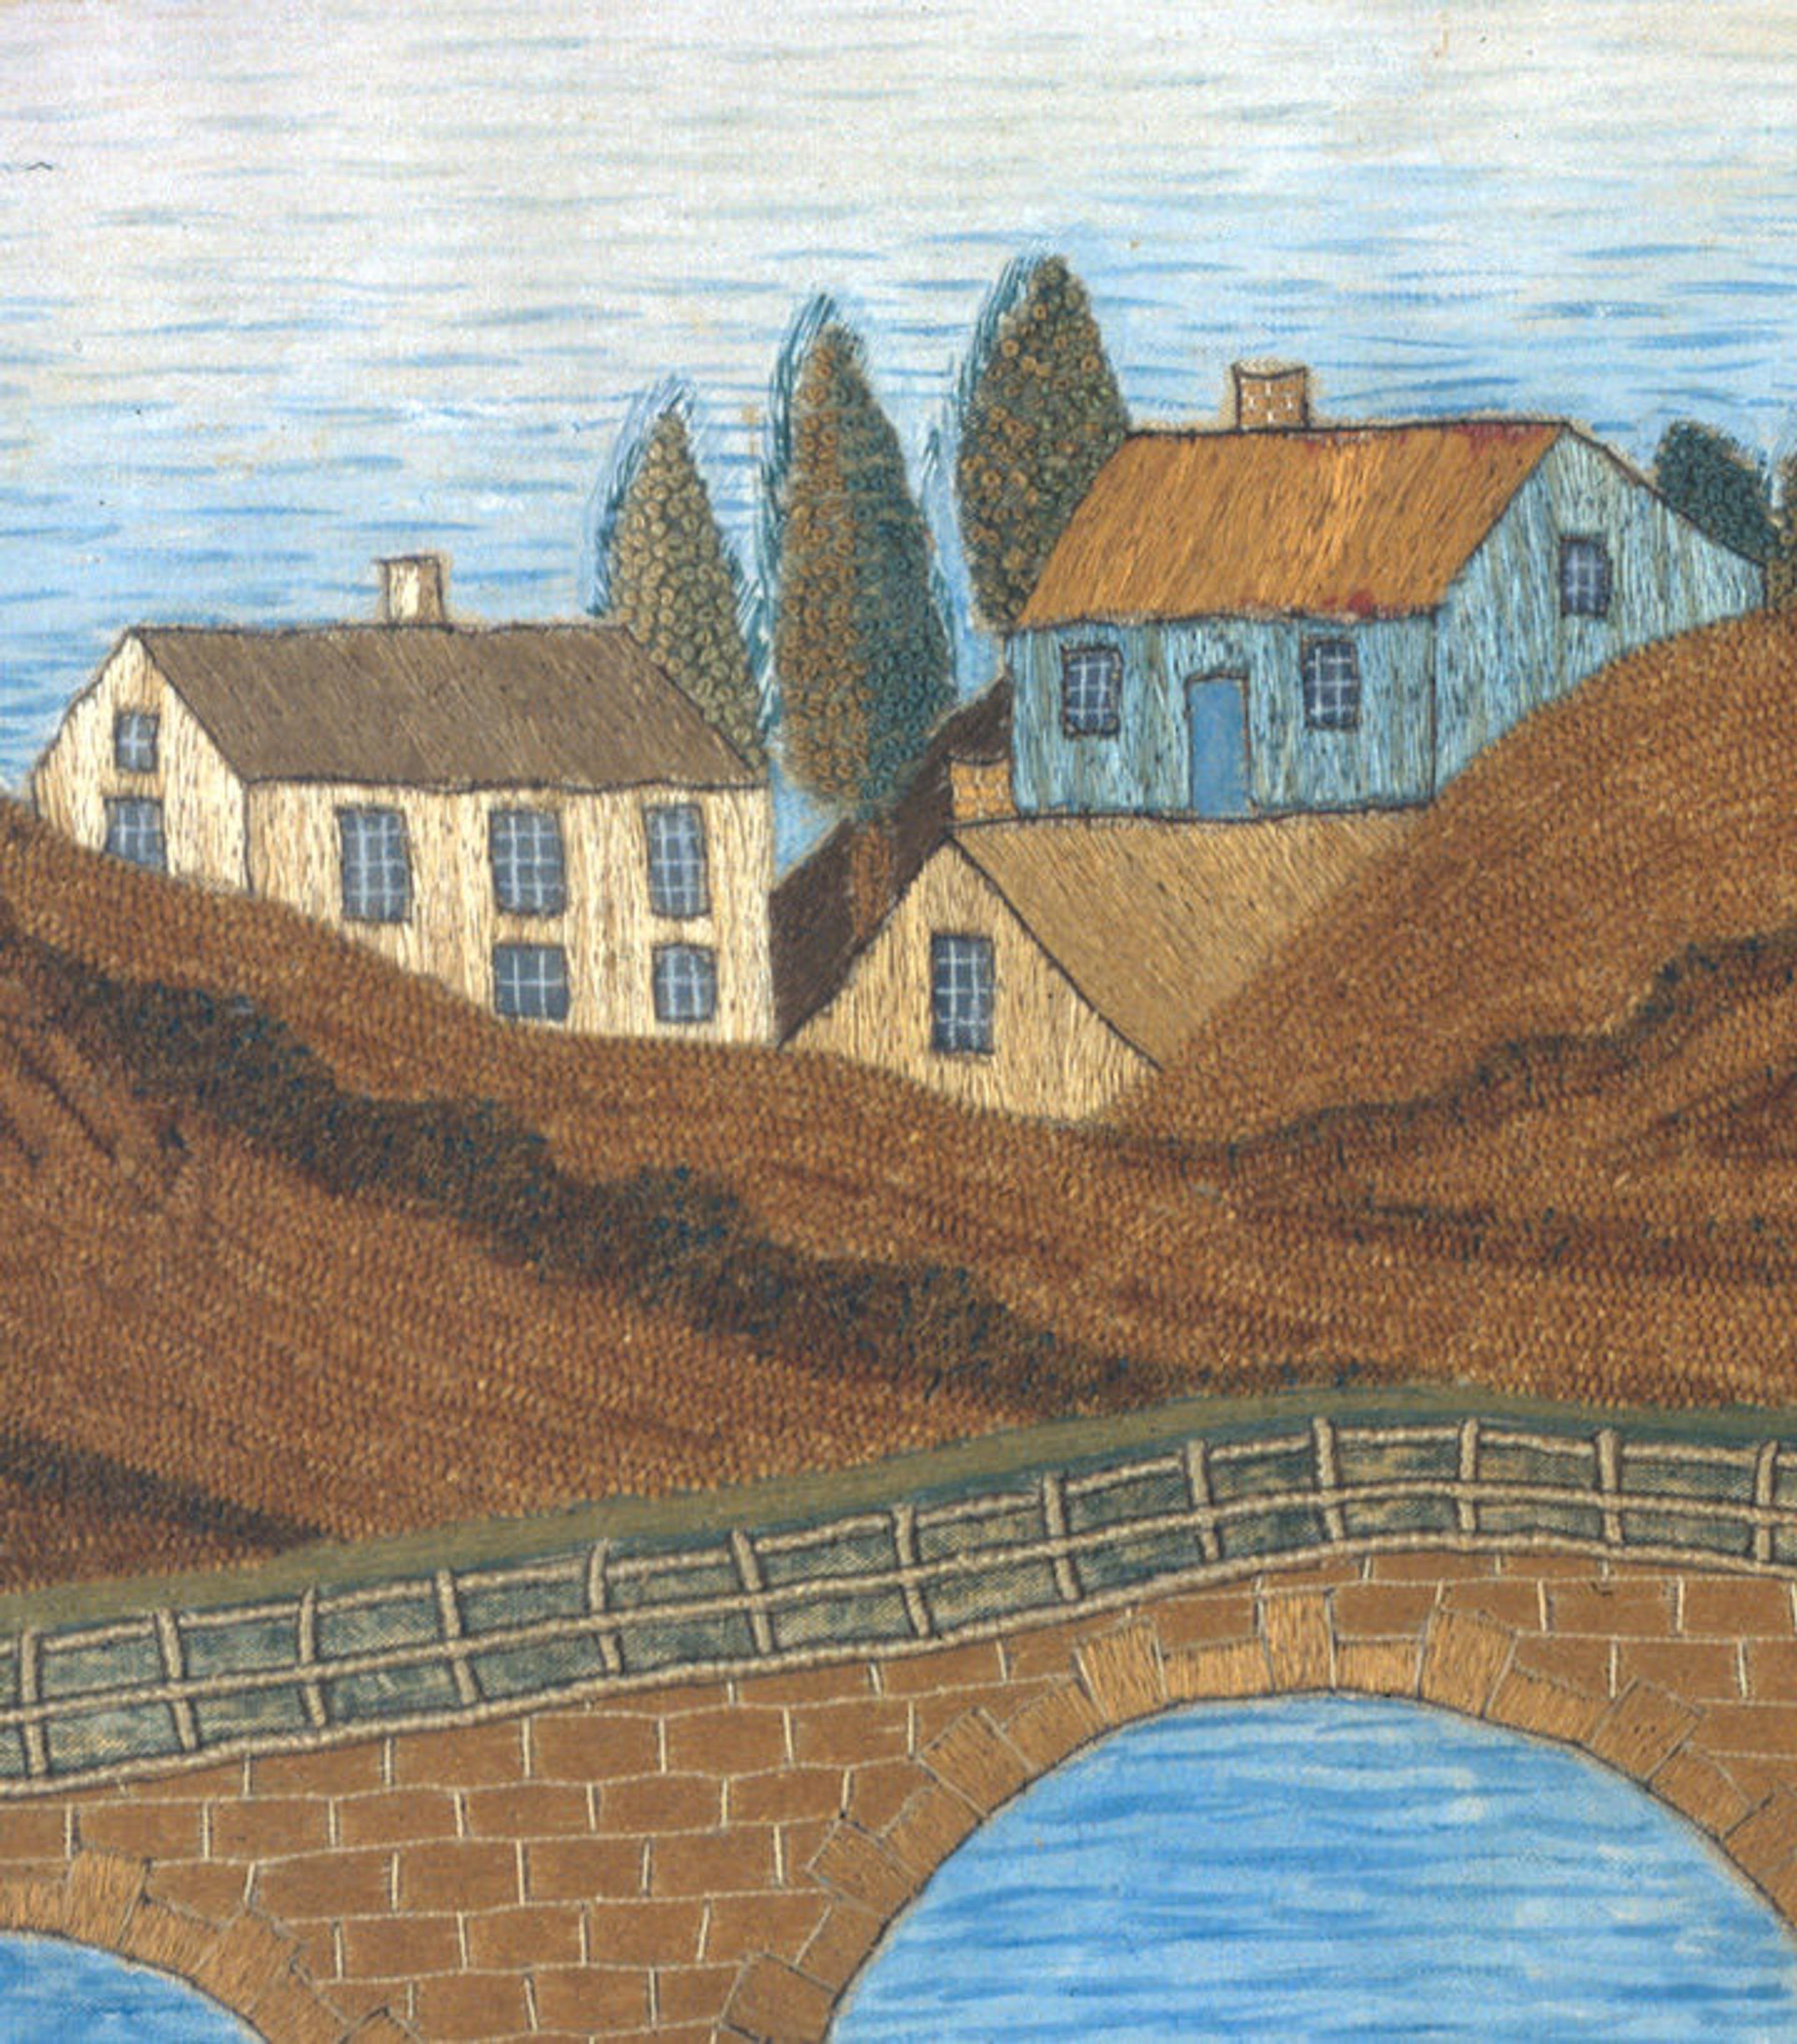 Detail of a needlework picture by Lucy Huntington shows distant blue and brown houses on a hillside, with a bridge and river below.